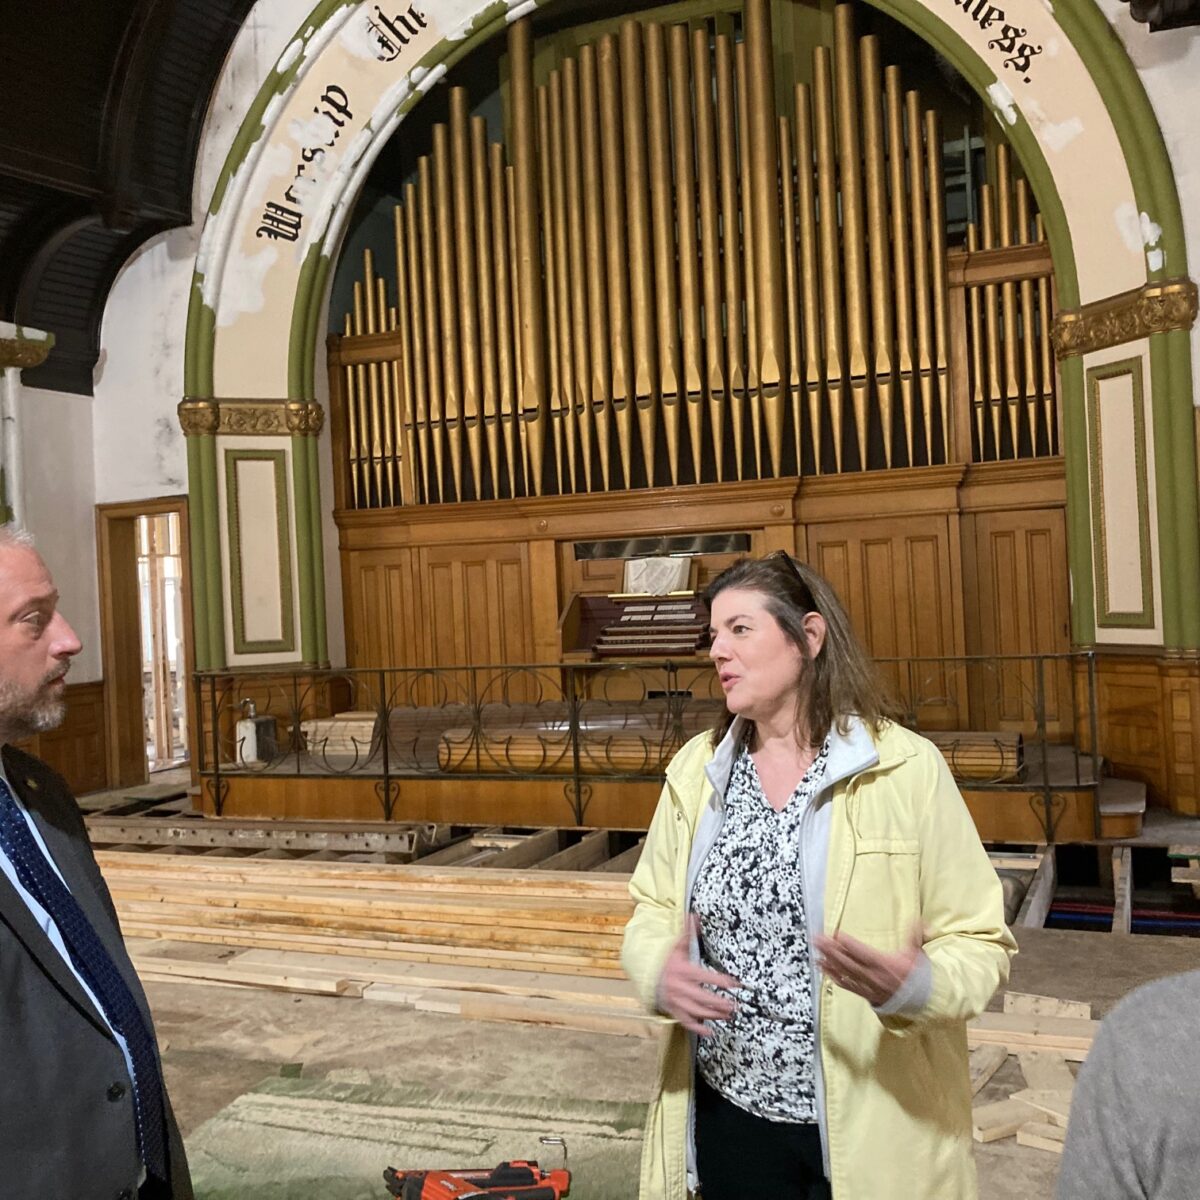 ‘Adaptive reuse’: Historic Braddock church being converted into apartments